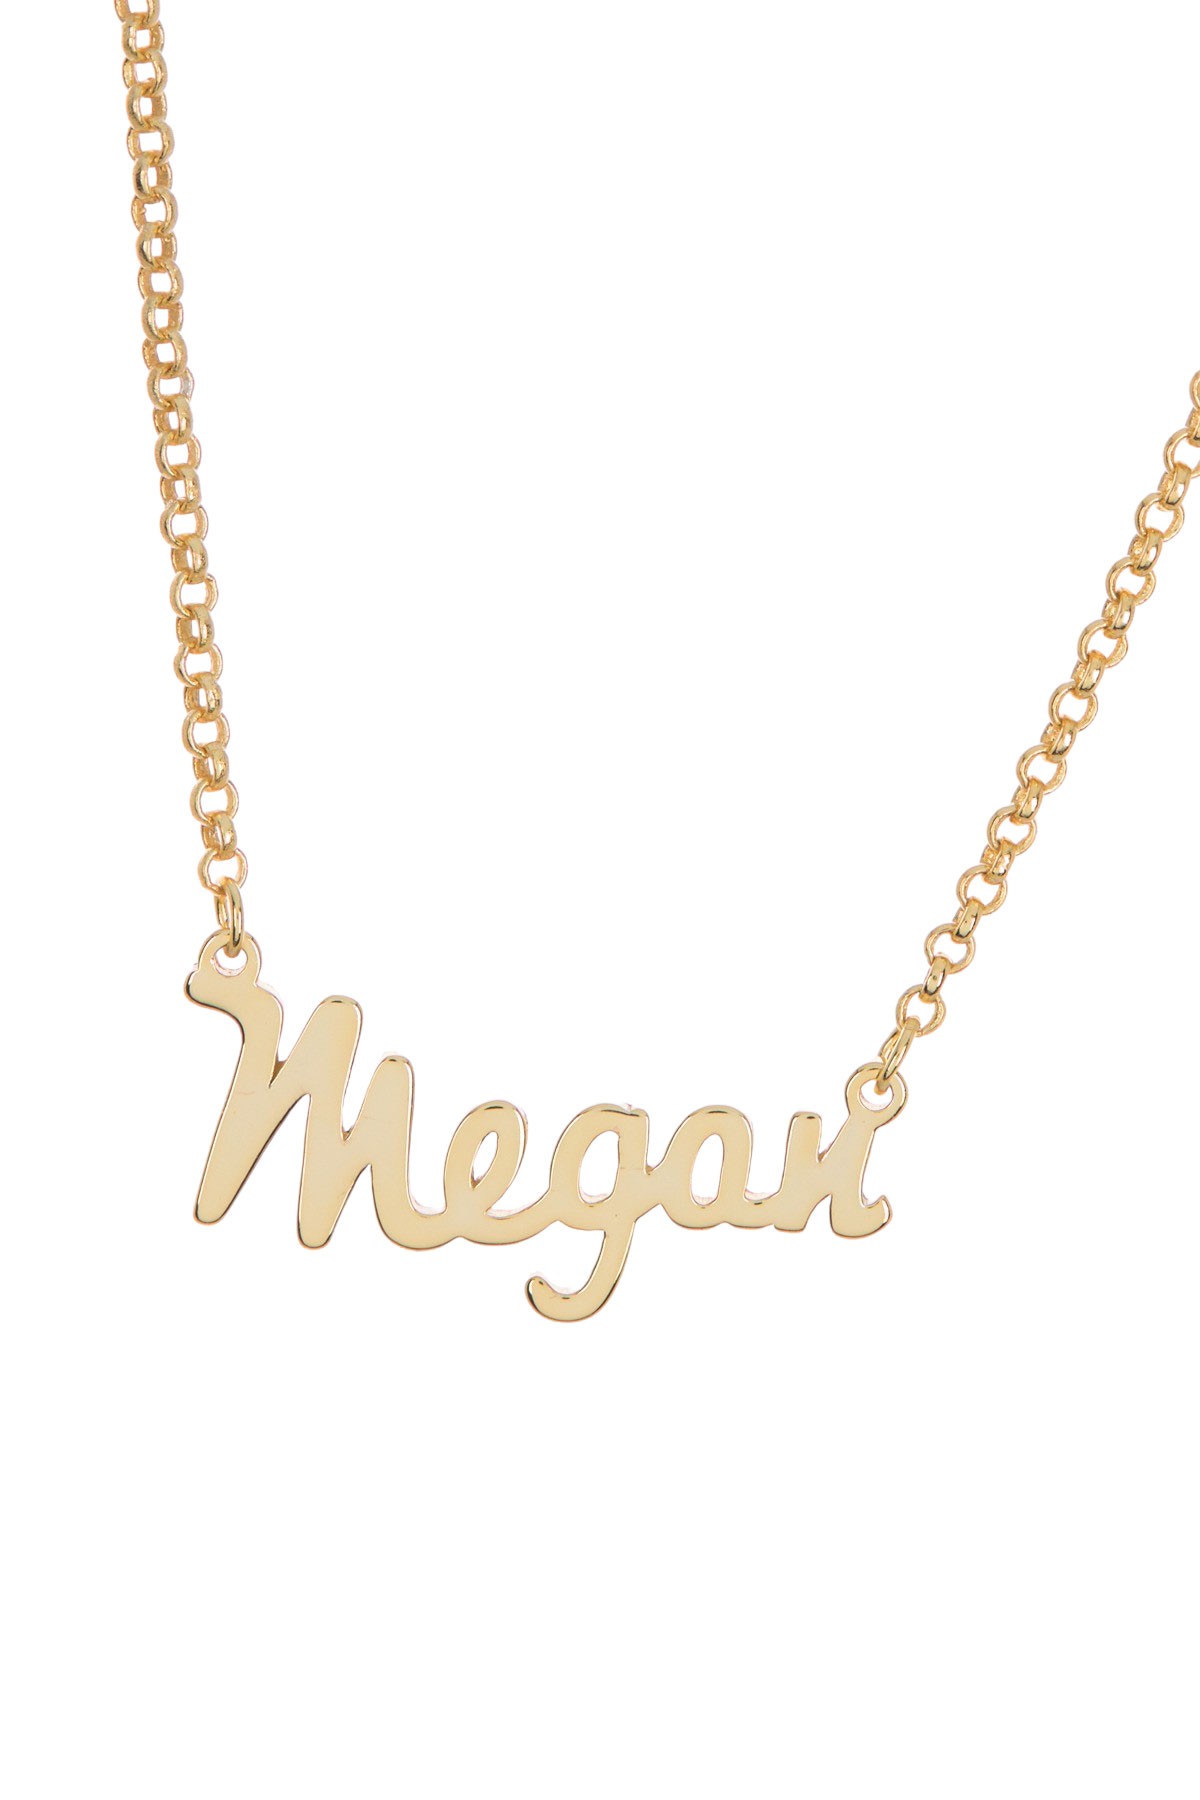 18K Yellow Gold Plated Sterling Silver 'Megan' Name Pendant Necklace Argento Vivo